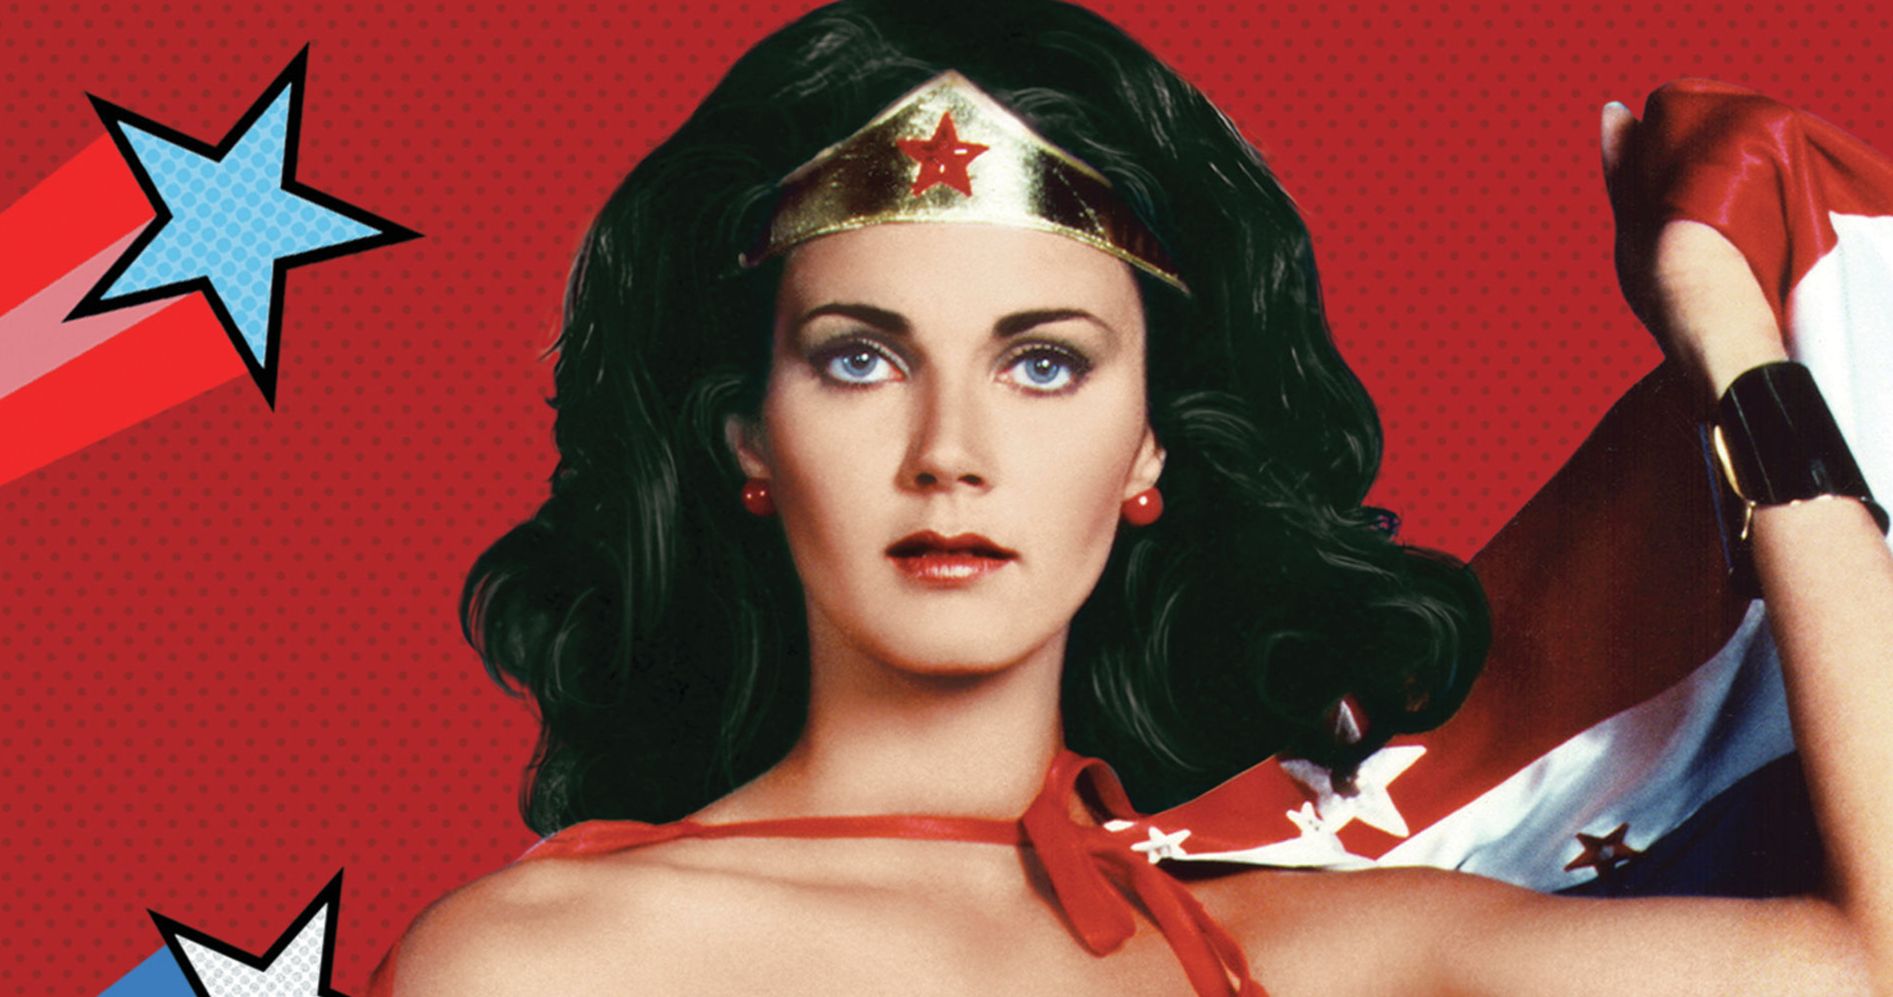 Wonder Woman Complete Collection Remastered Blu-ray Brings the Original 1970s Series Home